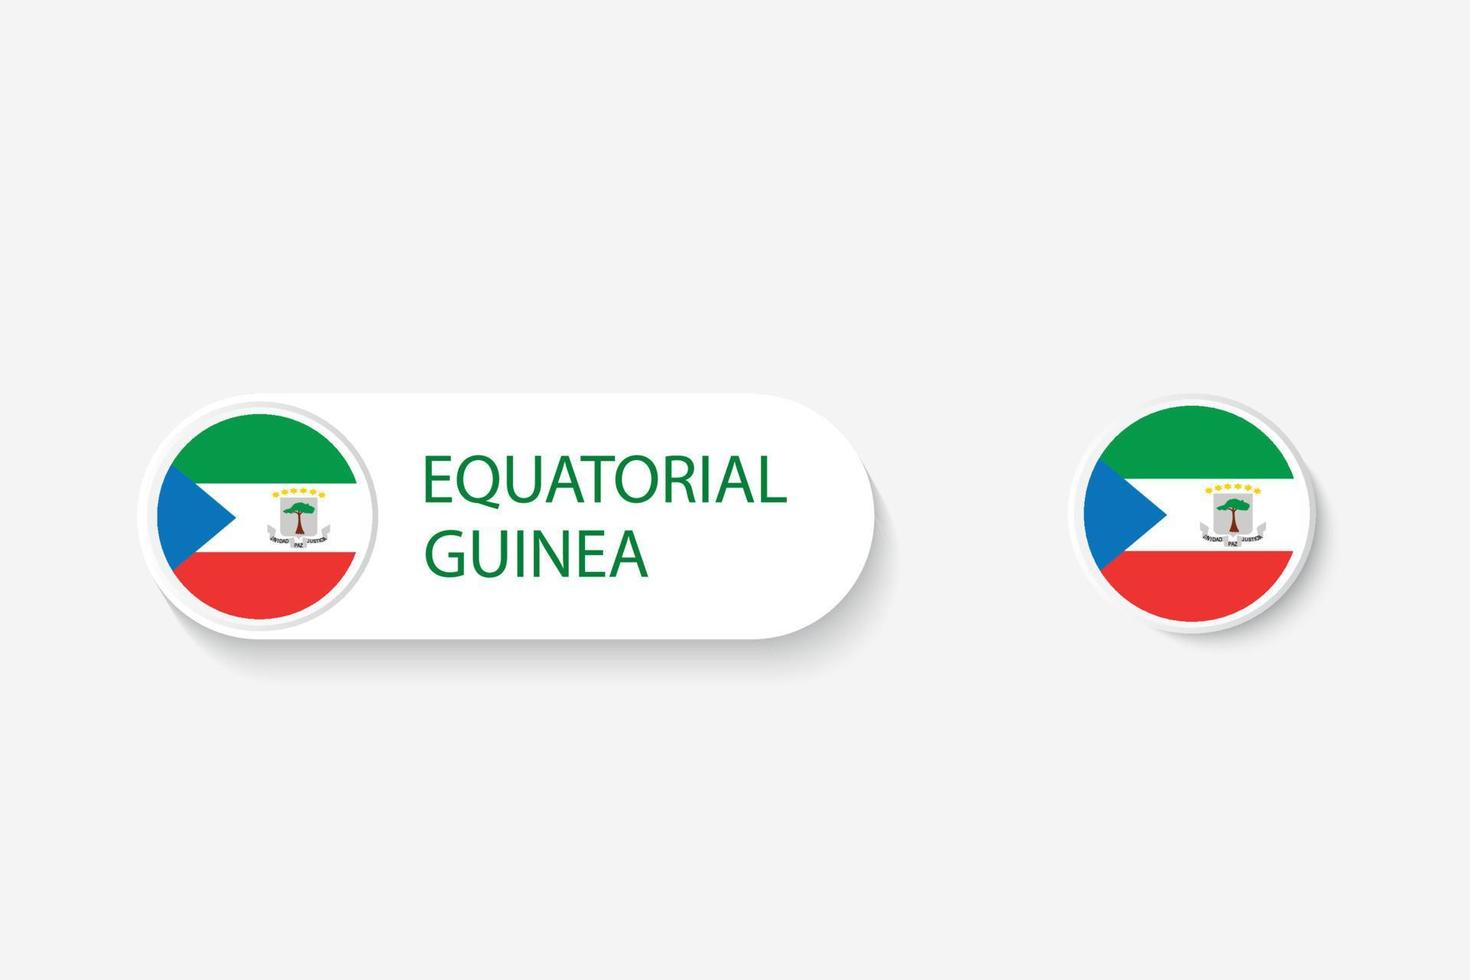 Equatorial Guinea button flag in illustration of oval shaped with word of Equatorial Guinea. And button flag Equatorial Guinea. vector